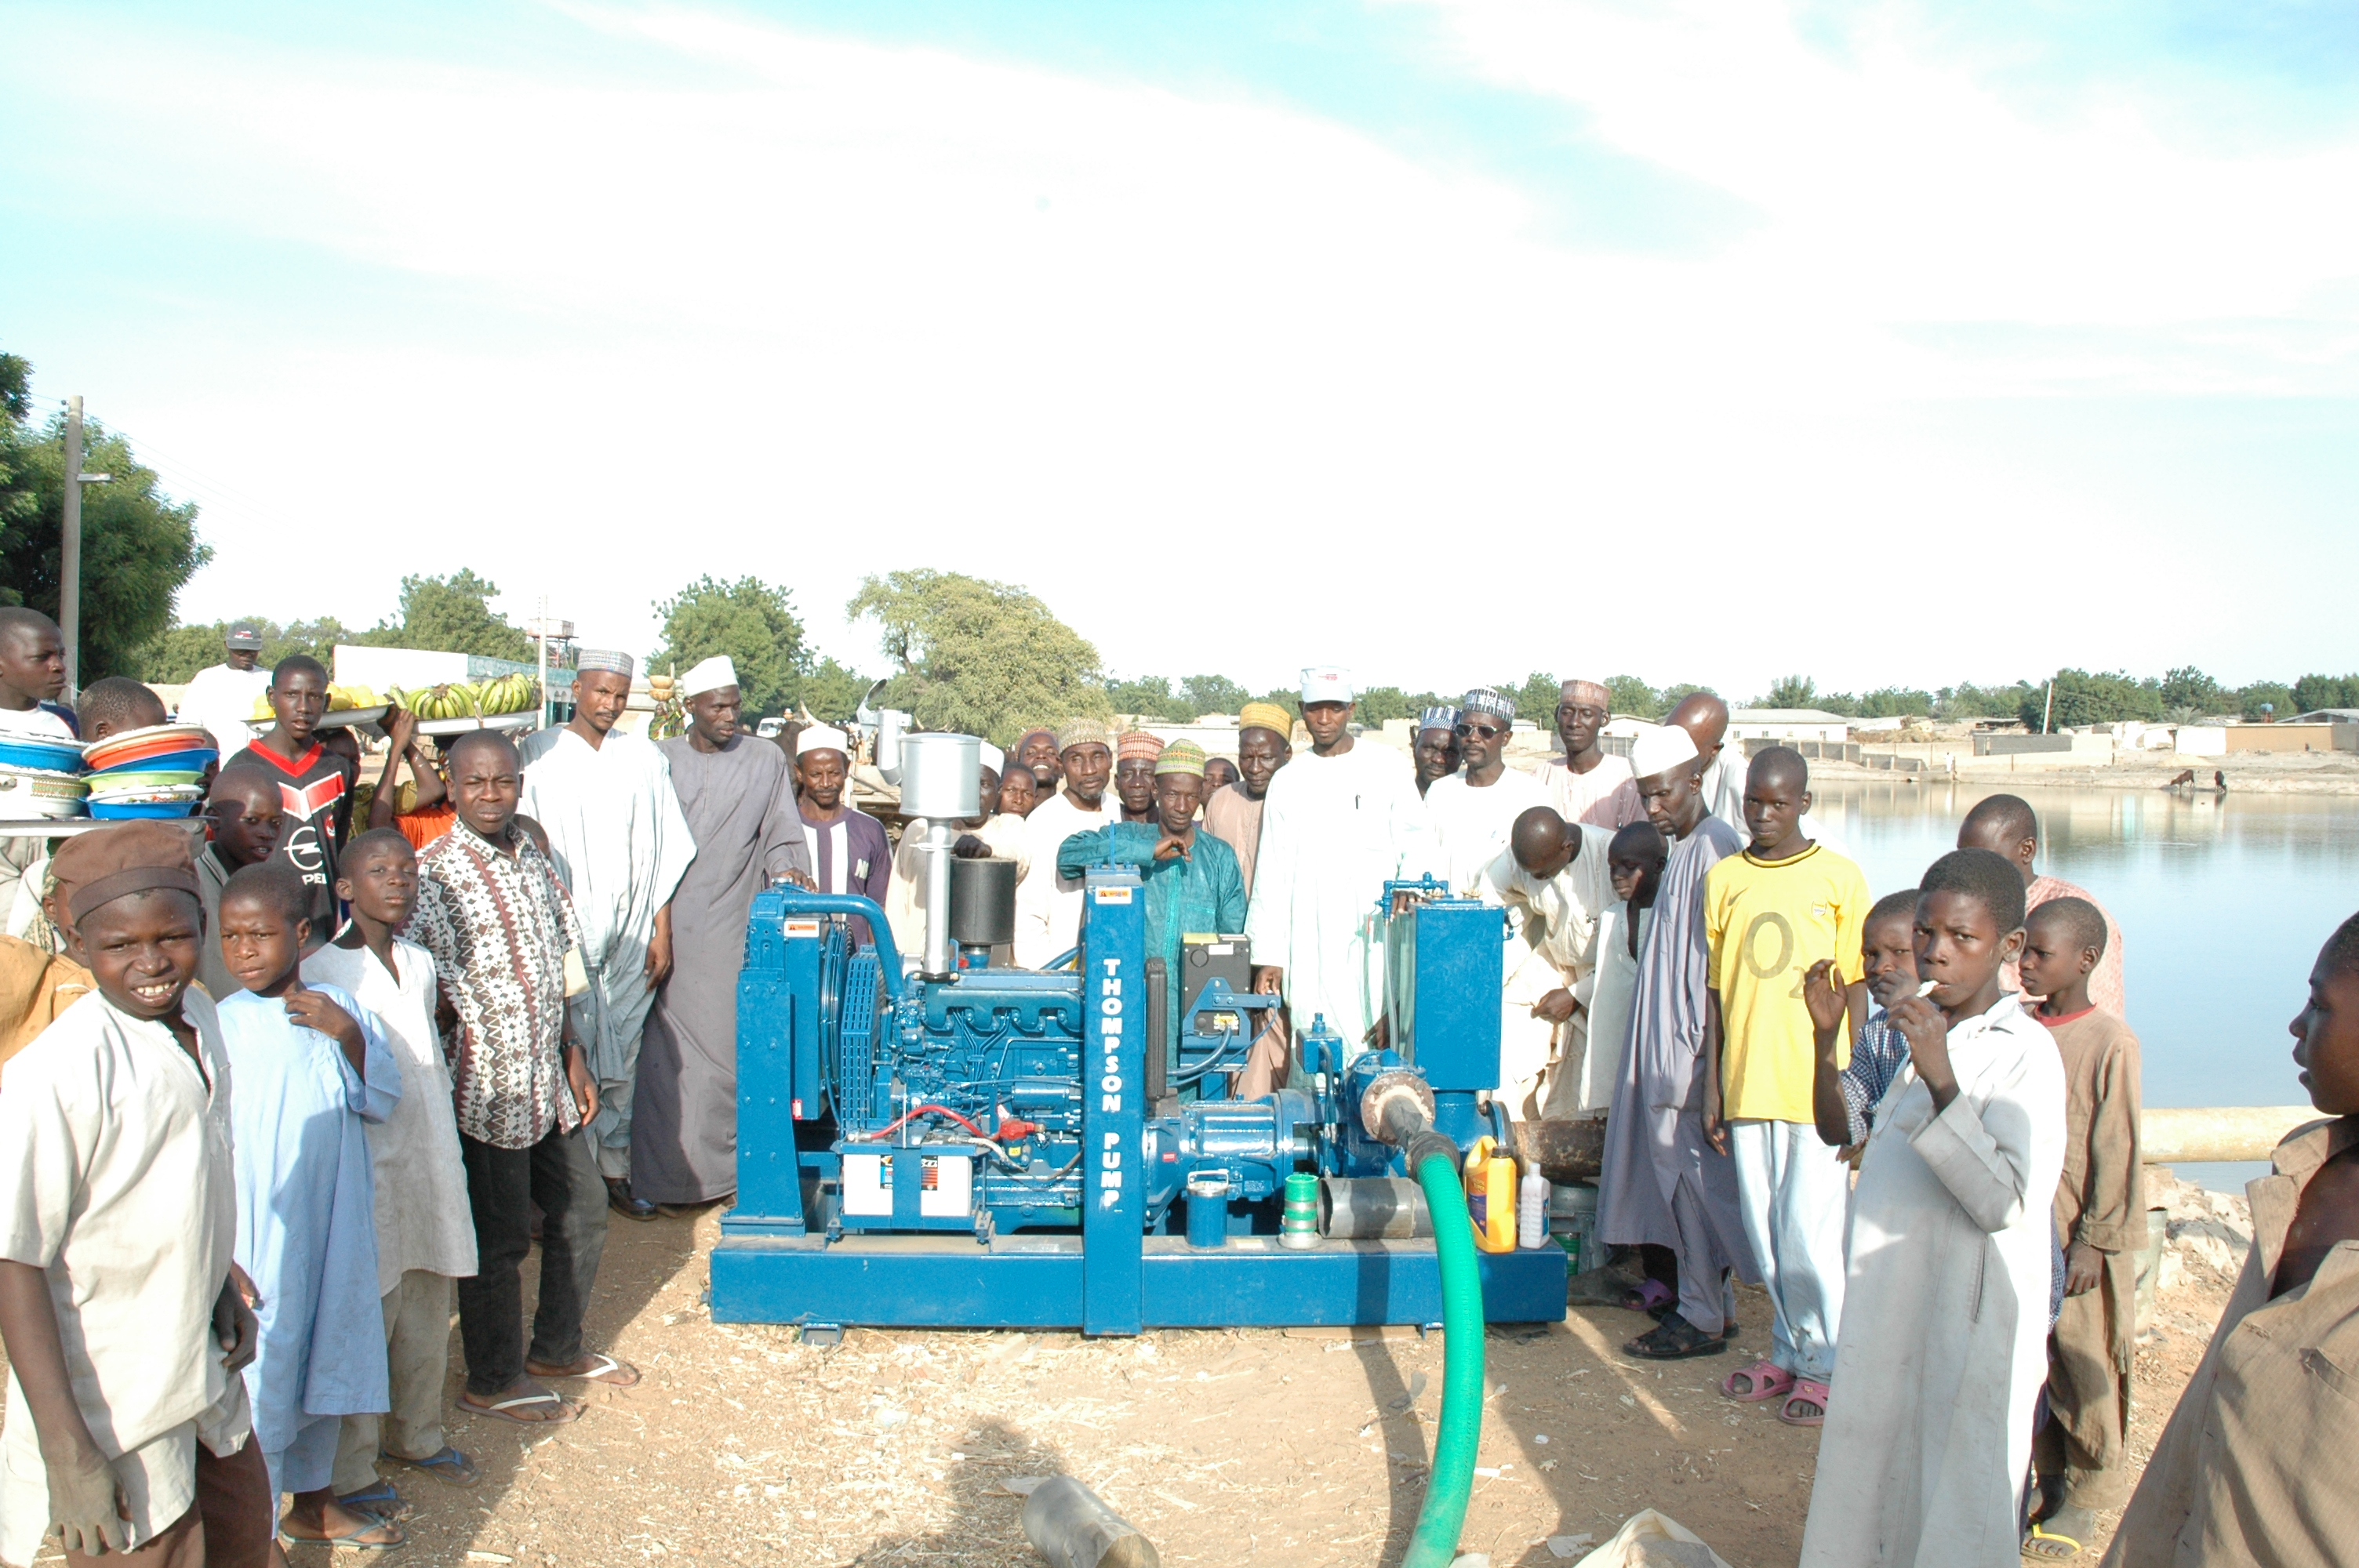 Residents gather around one of 30 pumps that were purchased for an agricultural improvement project to bring water to a remote village in Africa.